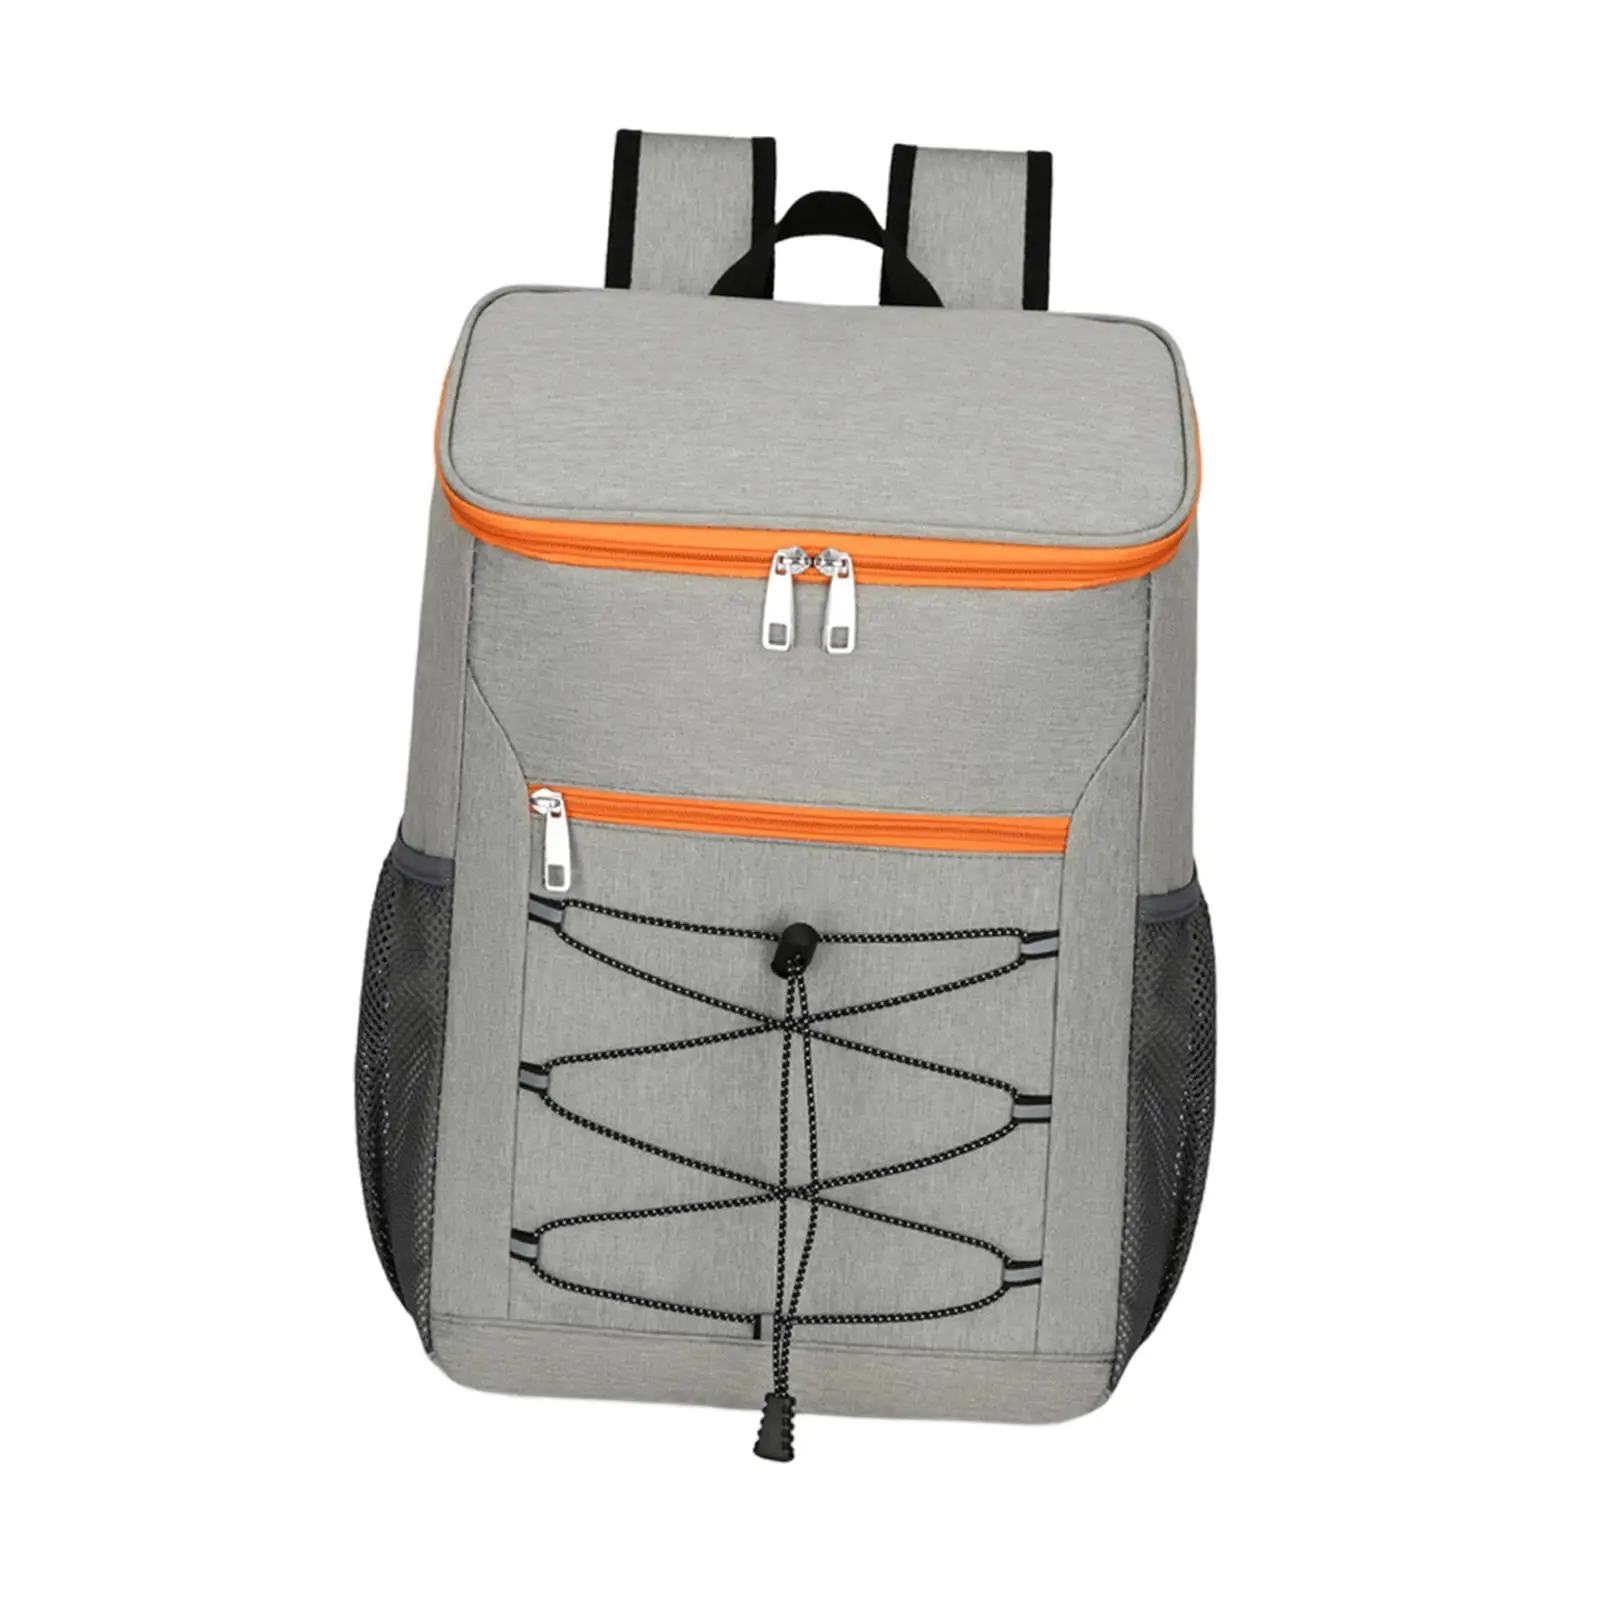 Insulated Cooler Backpack Waterproof Cooler Bag Portable Men Women Waterproof Lunch Backpack for Beach Picnic Hiking Camping